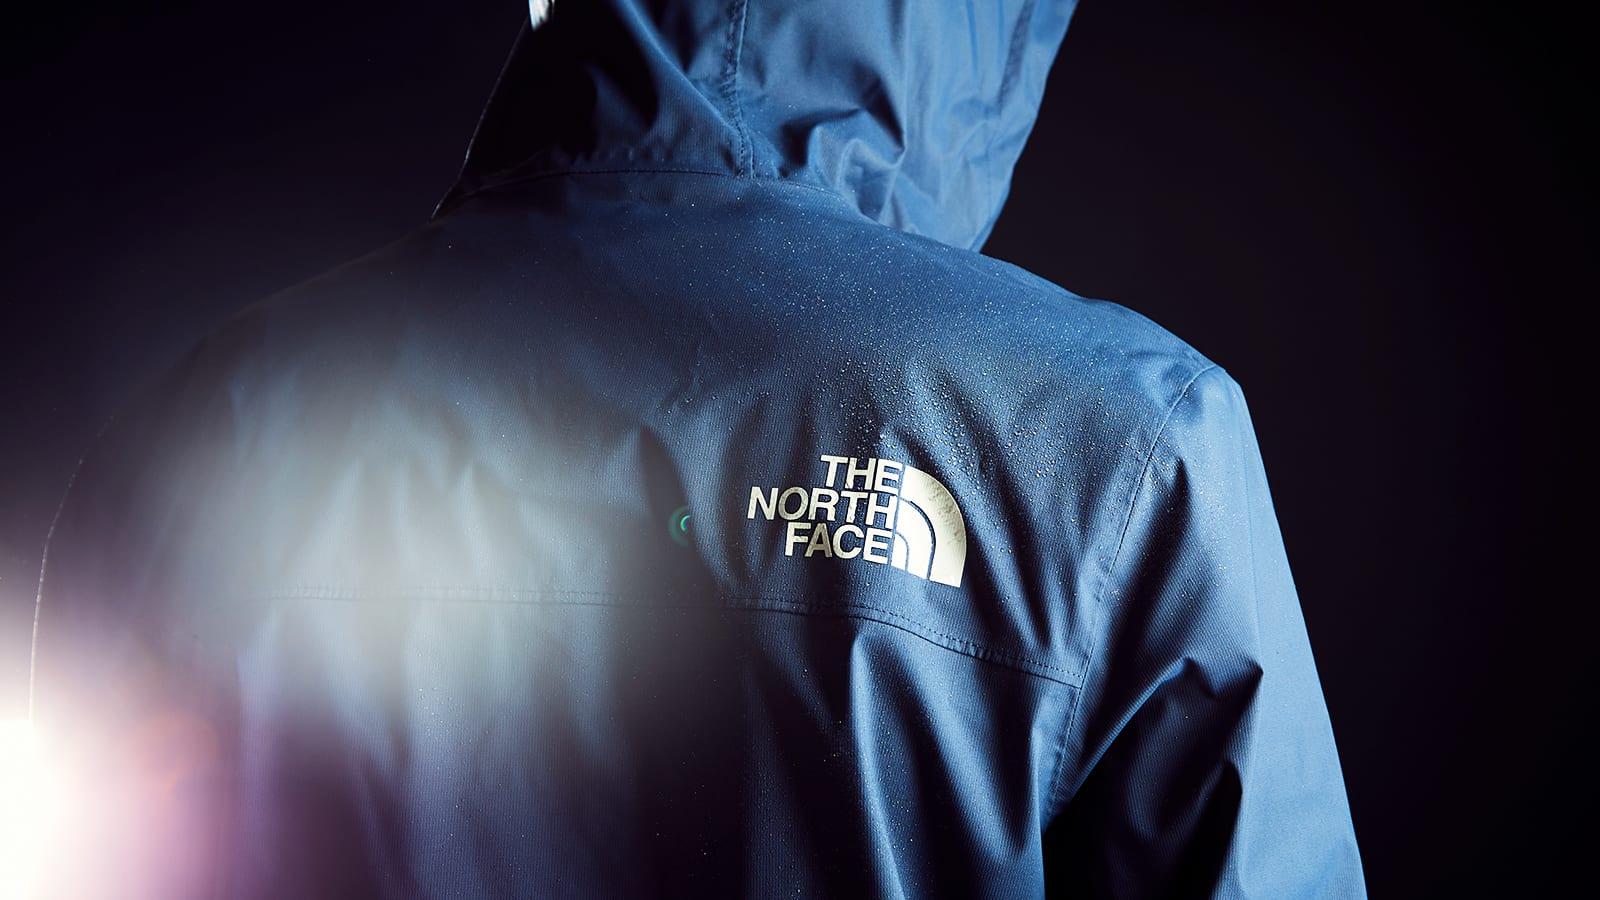 The North Face Wallpapers - Wallpaper Cave